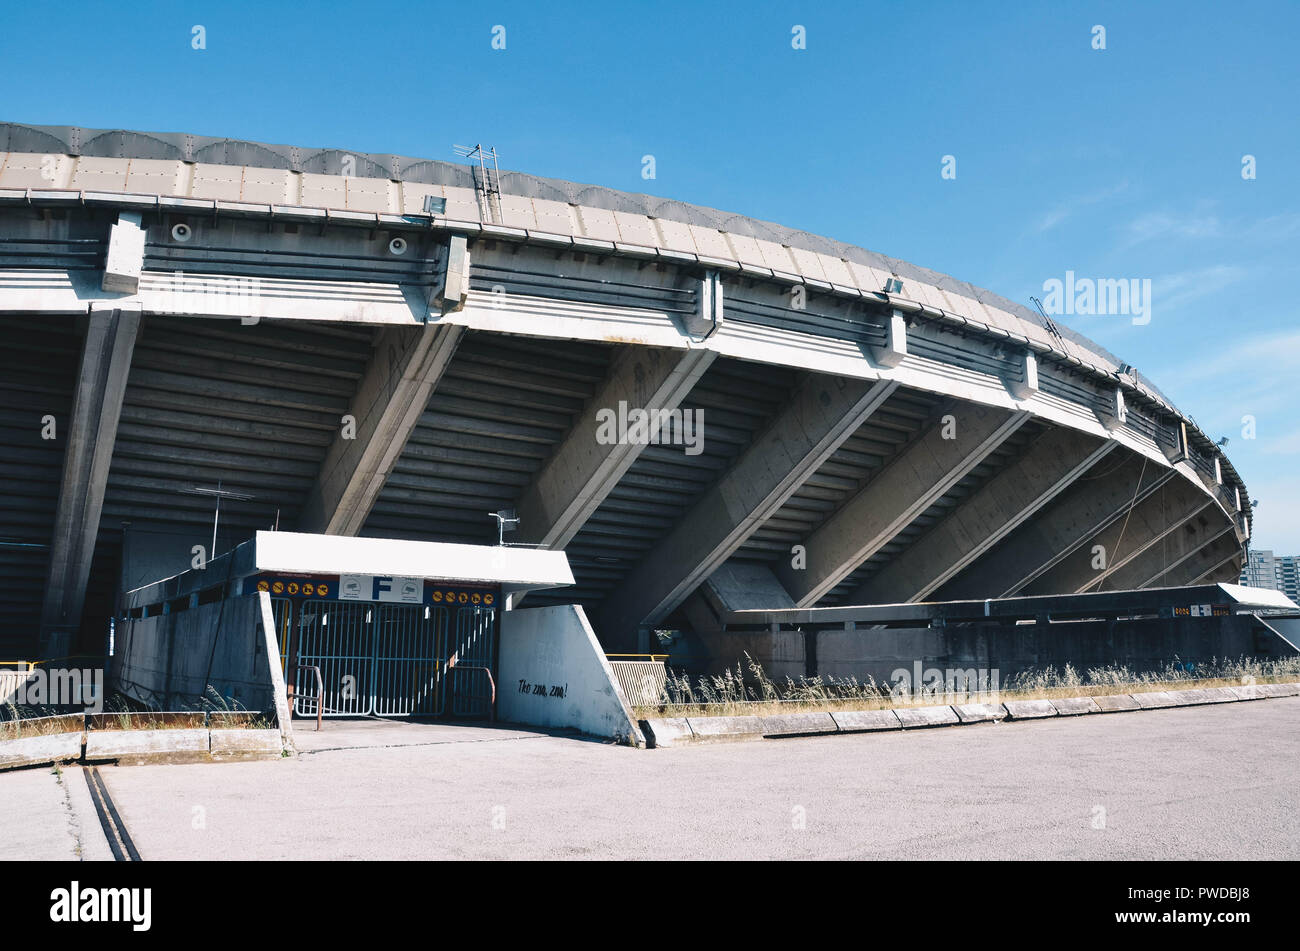 827 Poljud Stadium Photos & High Res Pictures - Getty Images